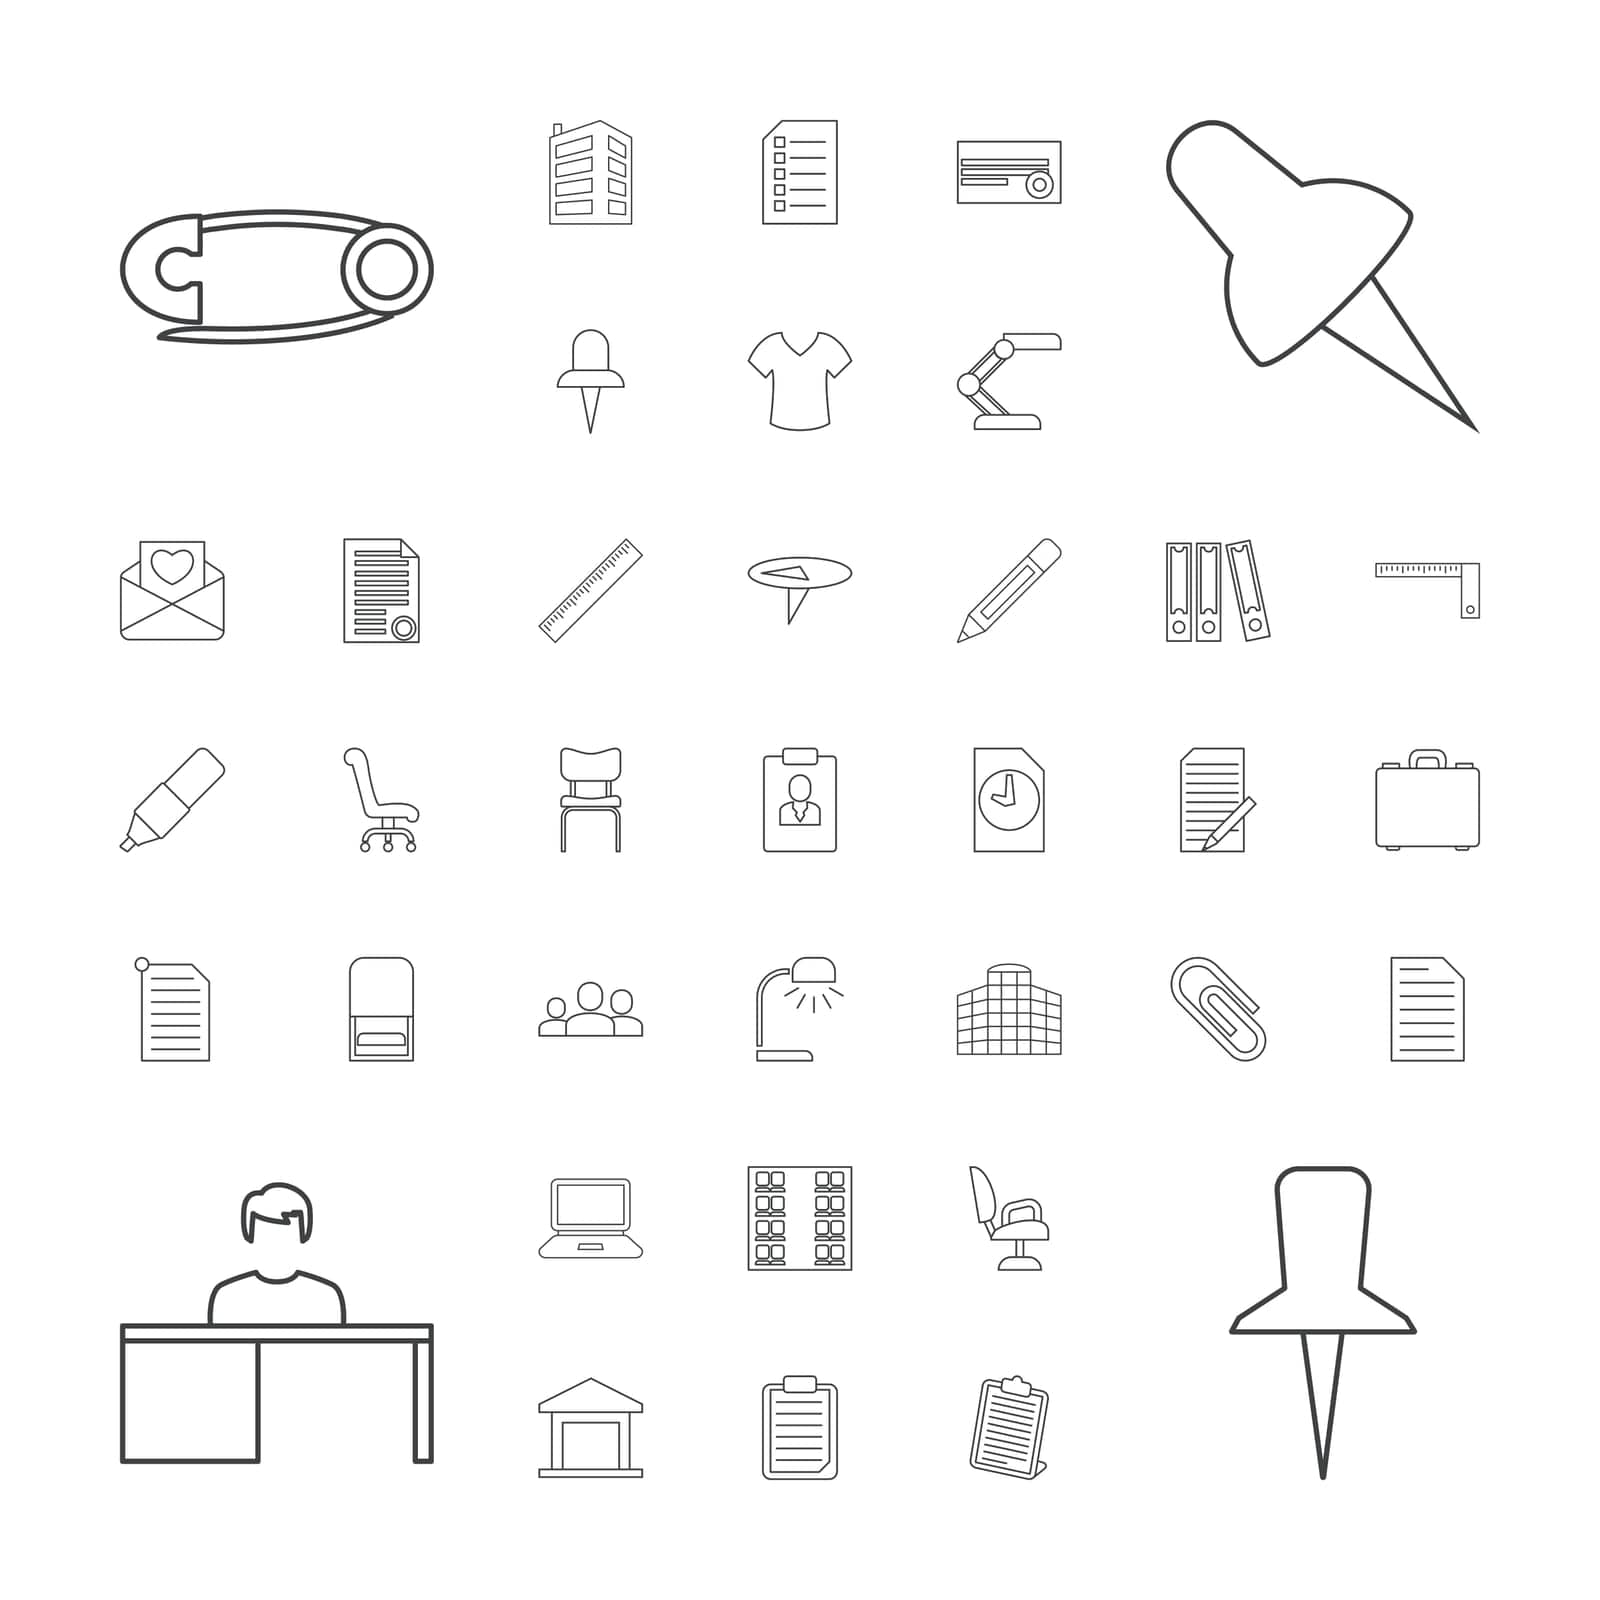 love,plane,symbol,document,icon,sign,isolated,office,ruler,laptop,supply,clipboard,seats,building,pin,paper,design,pen,working,vector,man,barber,binder,table,case,group,set,chair,lamp,pencil,the,shirt,at,background,letter,illustration,clip